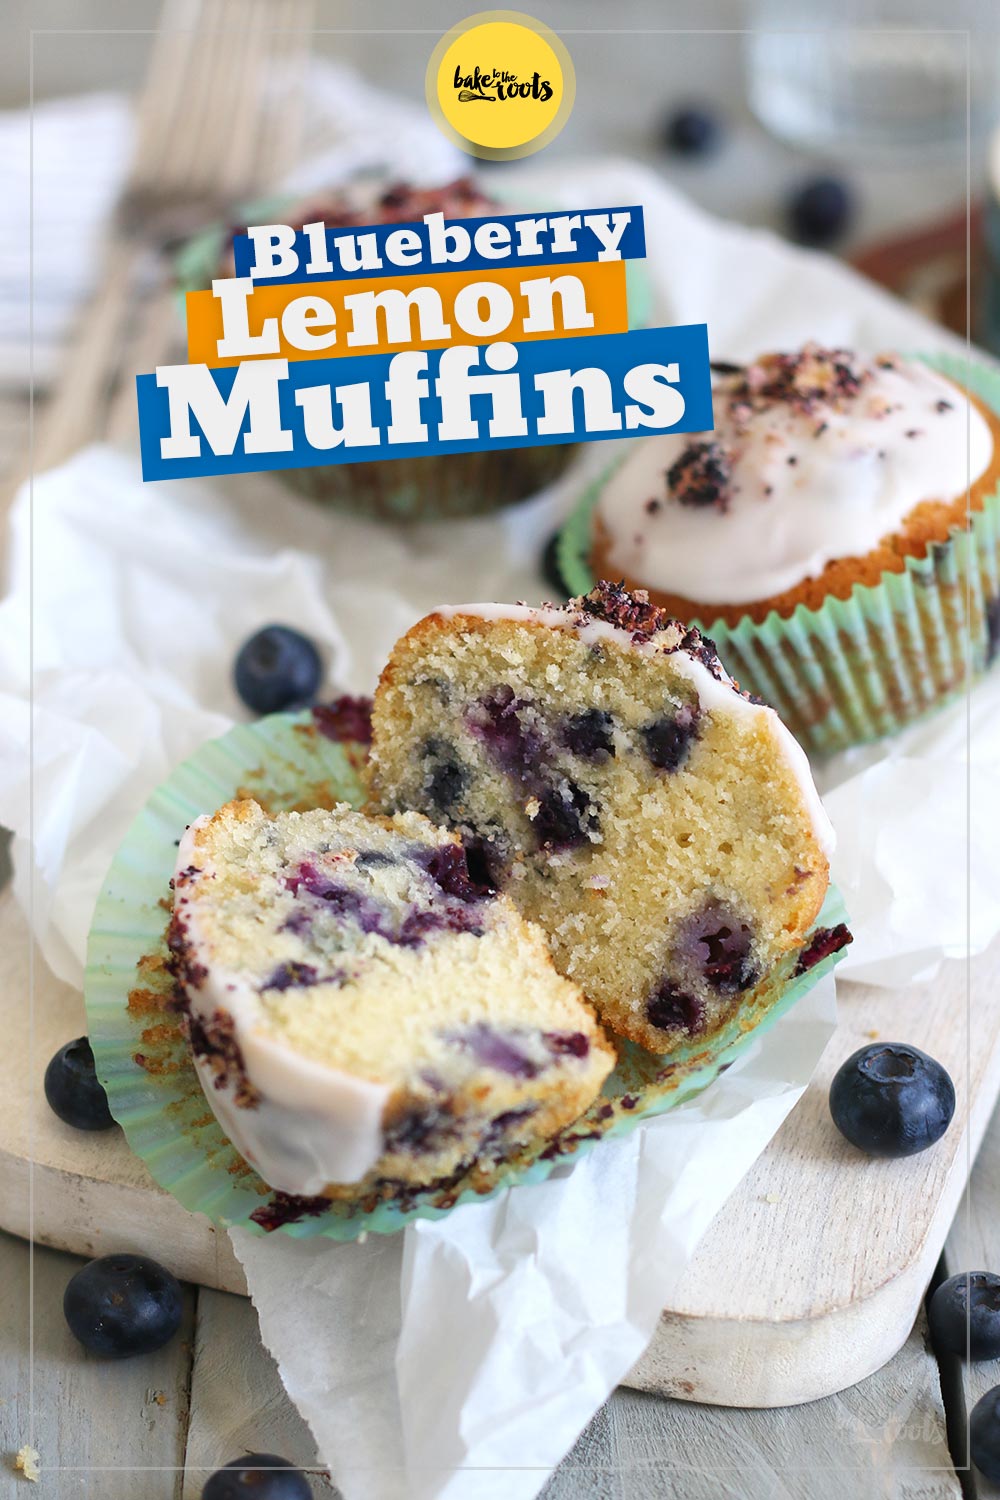 Blueberry Lemon Muffins | Bake to the roots